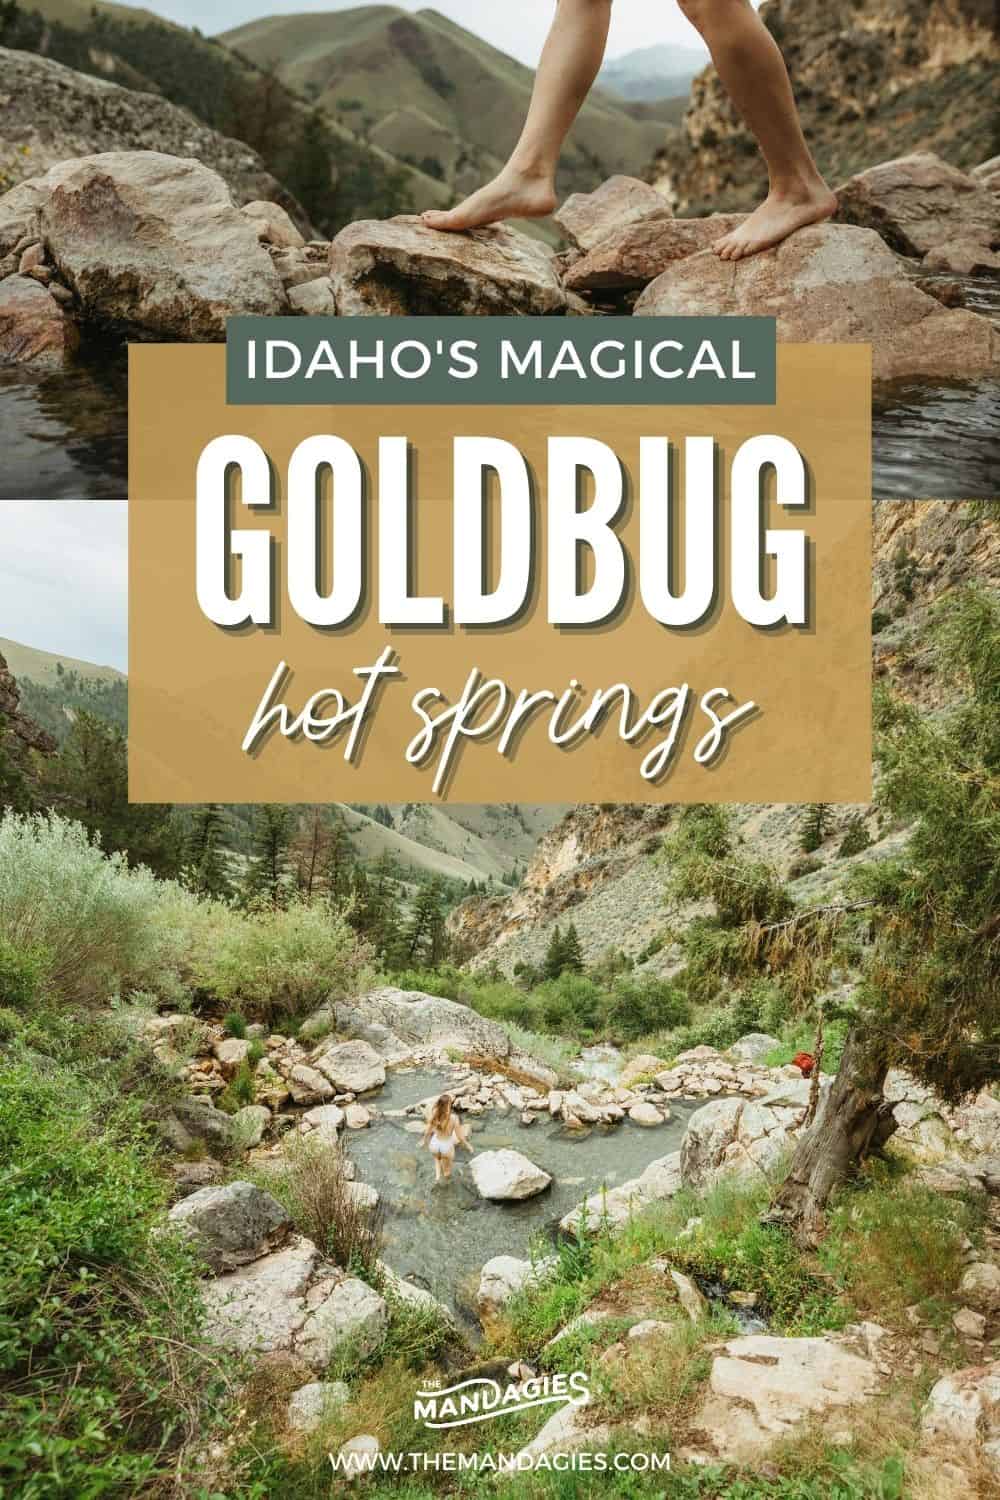 Goldbug Hot Springs is the trifecta of fun in Idaho - hiking, camping, and of course, hot springs! Click here to learn more about planning your own rad trip, and what to expect on the trail, rules for camping, and all the details to plan your own magical getaway in the Gem State. #idaho #hotsprings #stanleyidaho #Roadtrip #summer #hiking #camping #salmonriver #goldbug #mountains #travel #USAtravel #usa #photography #sunset